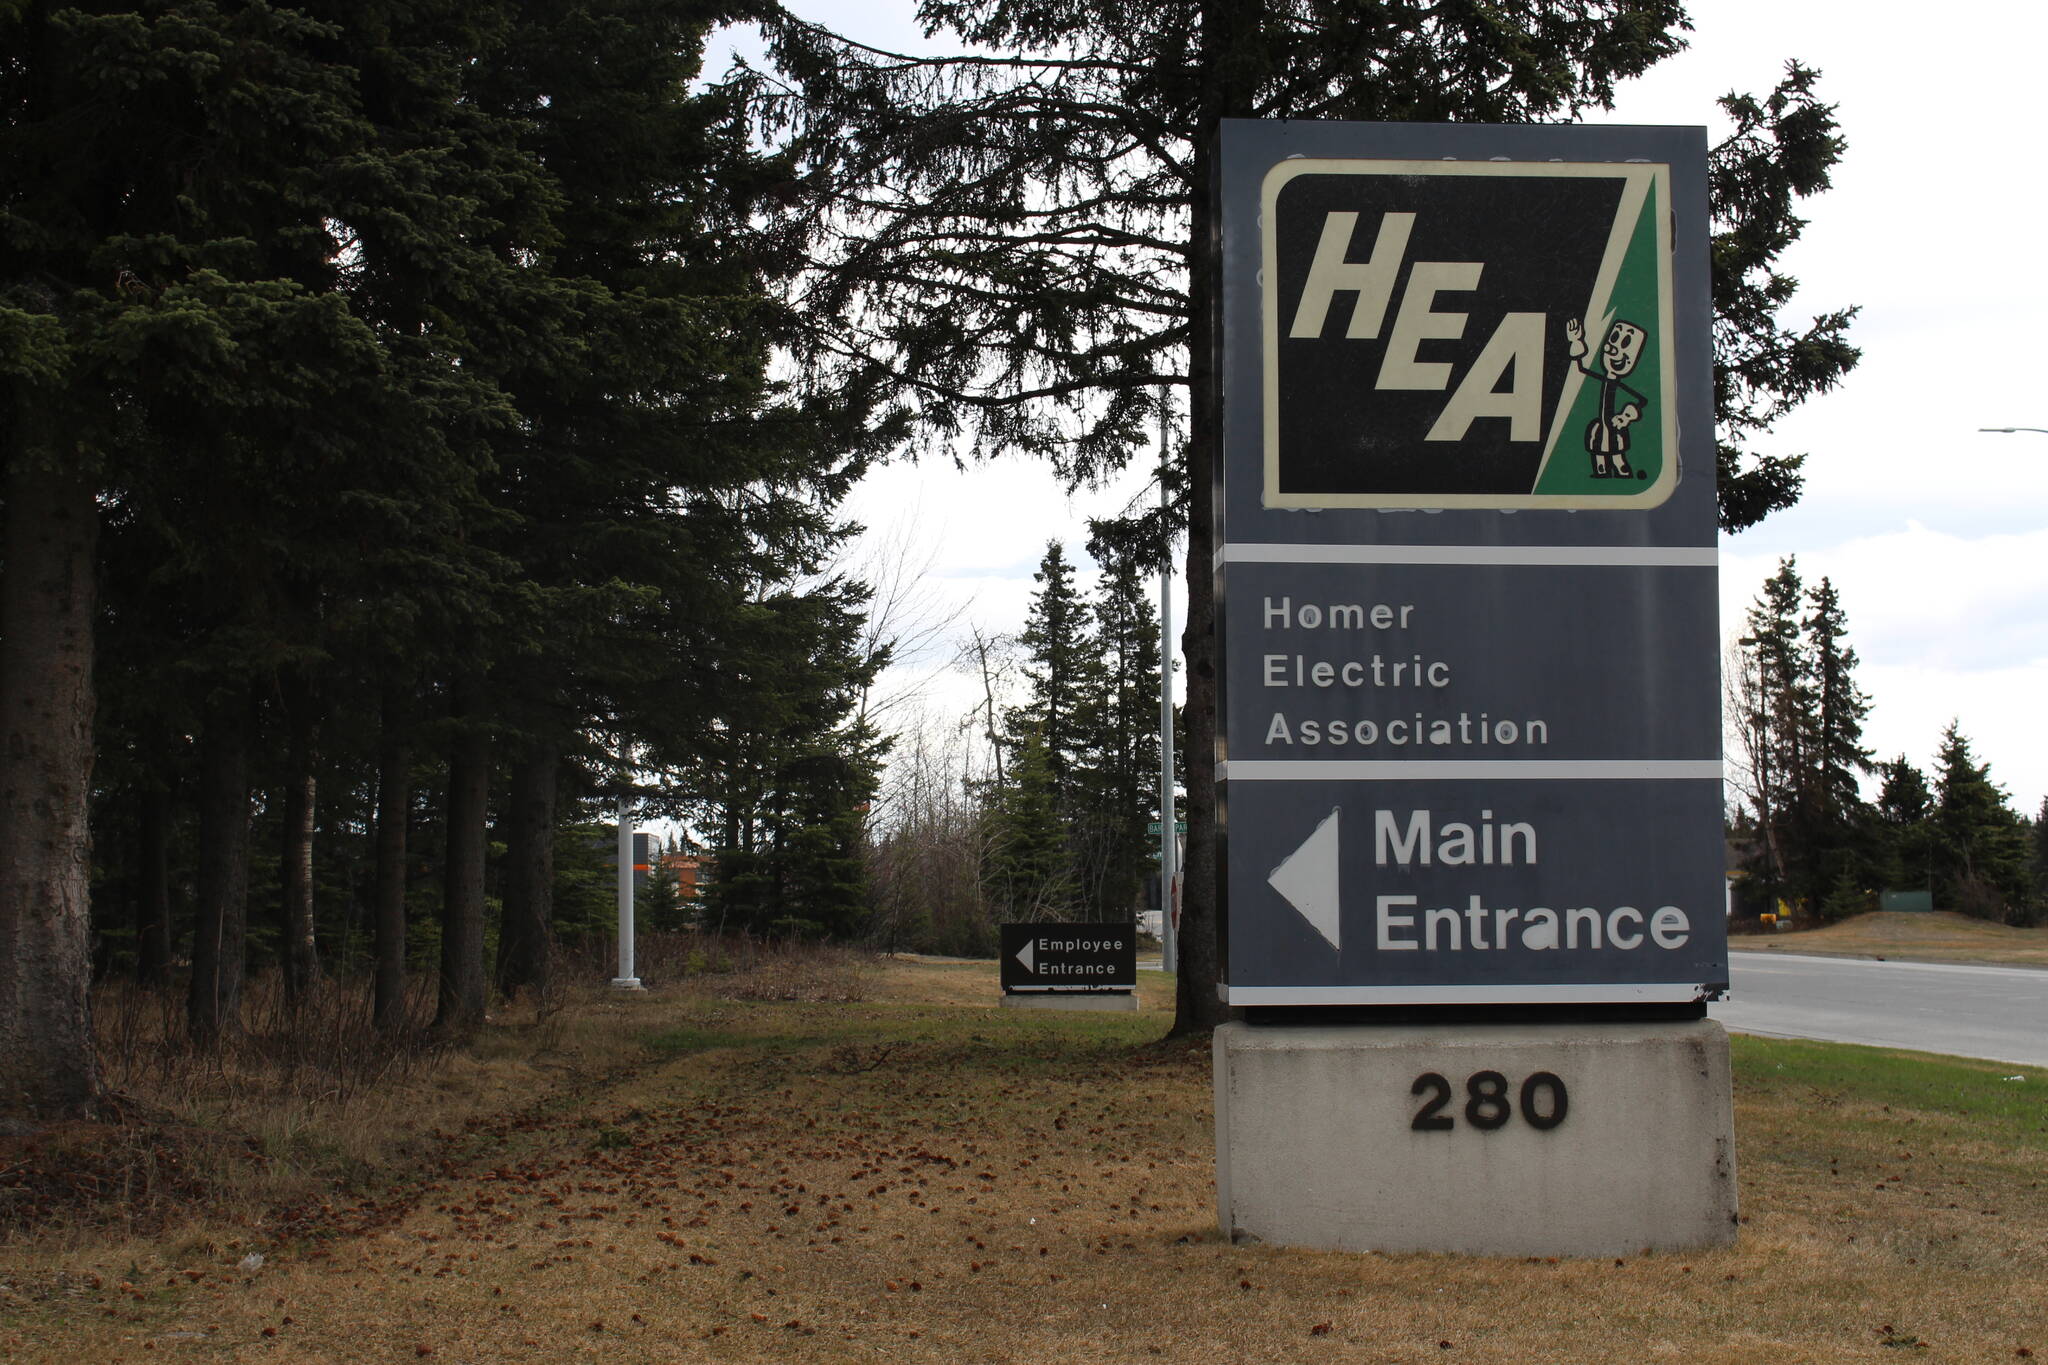 The entrance to the Homer Electric Association office is seen here in Kenai, Alaska, on May 7, 2020. (Photo by Brian Mazurek/Peninsula Clarion file)